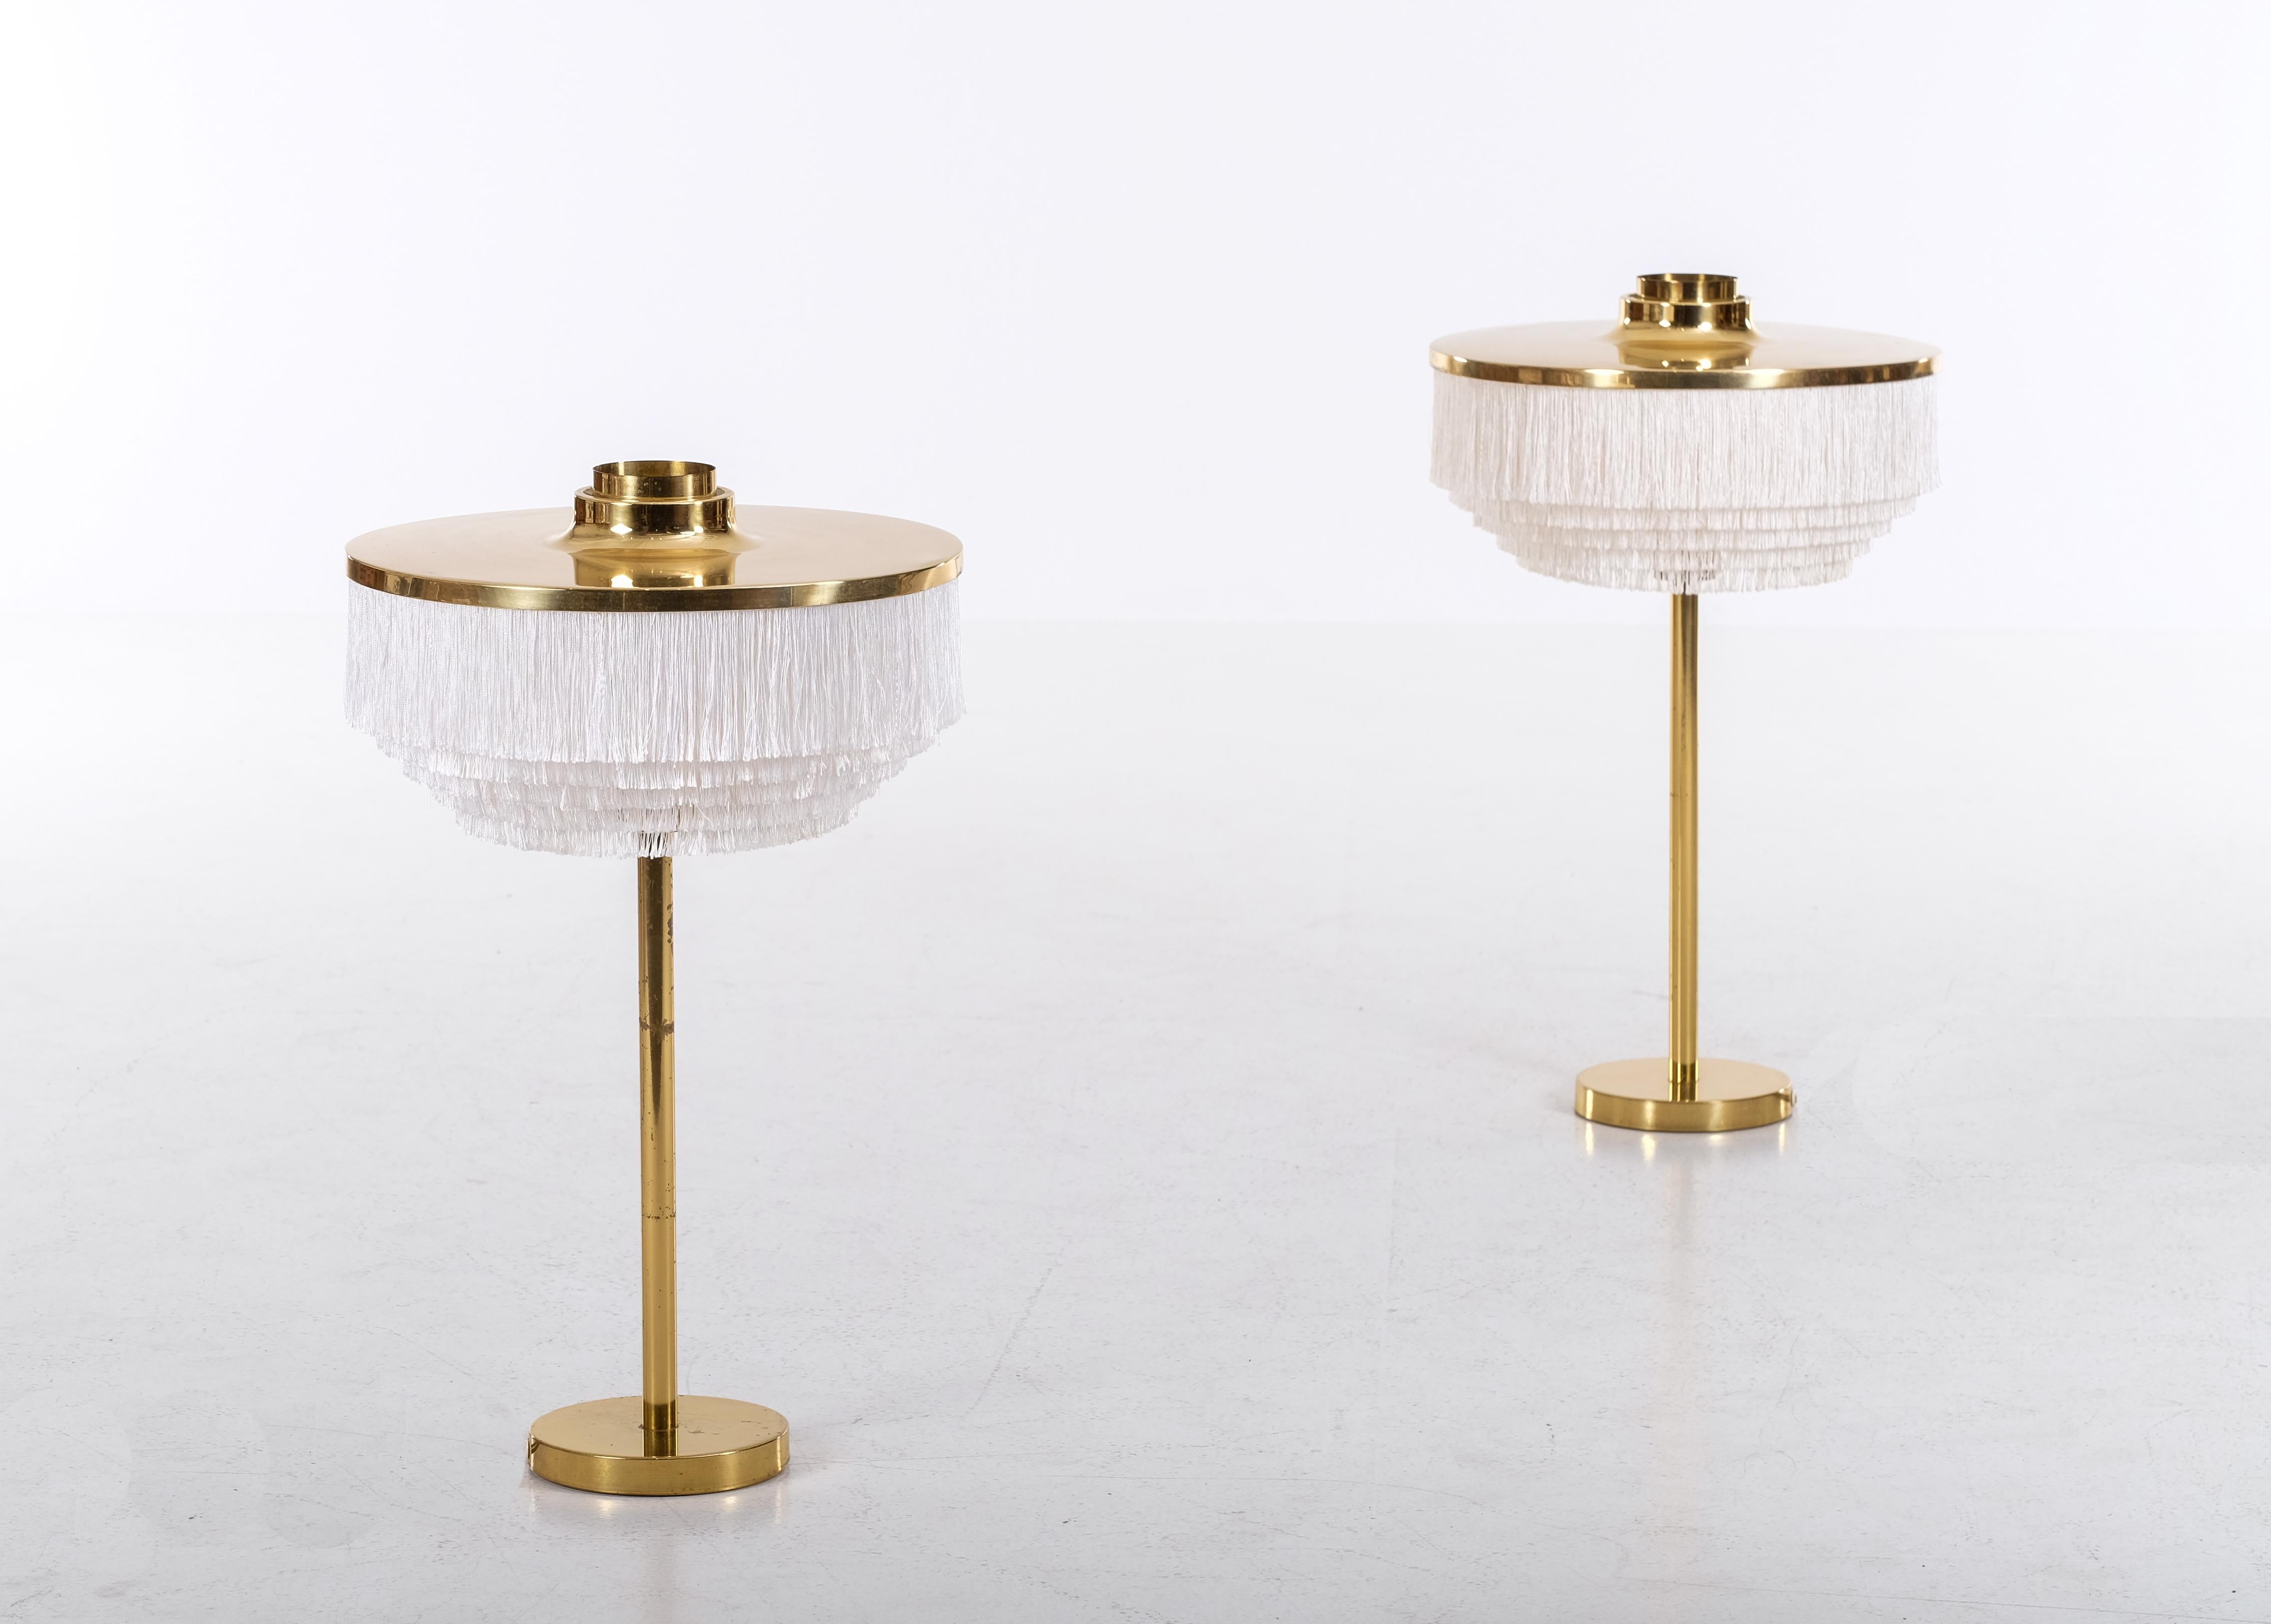 Swedish Pair of Hans-Agne Jakobsson Model B-138 Brass Table Lamps, 1960s For Sale